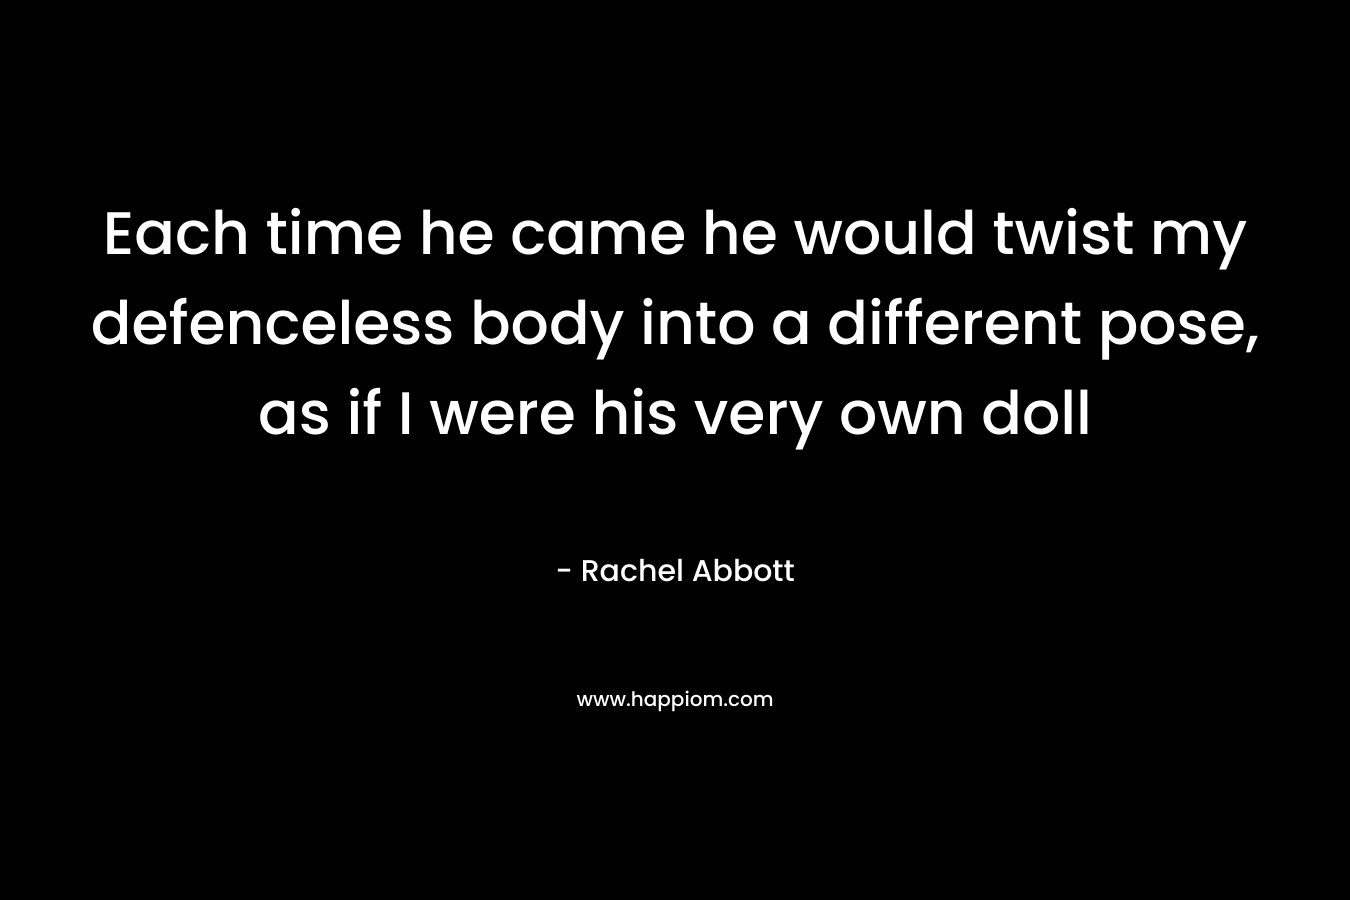 Each time he came he would twist my defenceless body into a different pose, as if I were his very own doll – Rachel Abbott